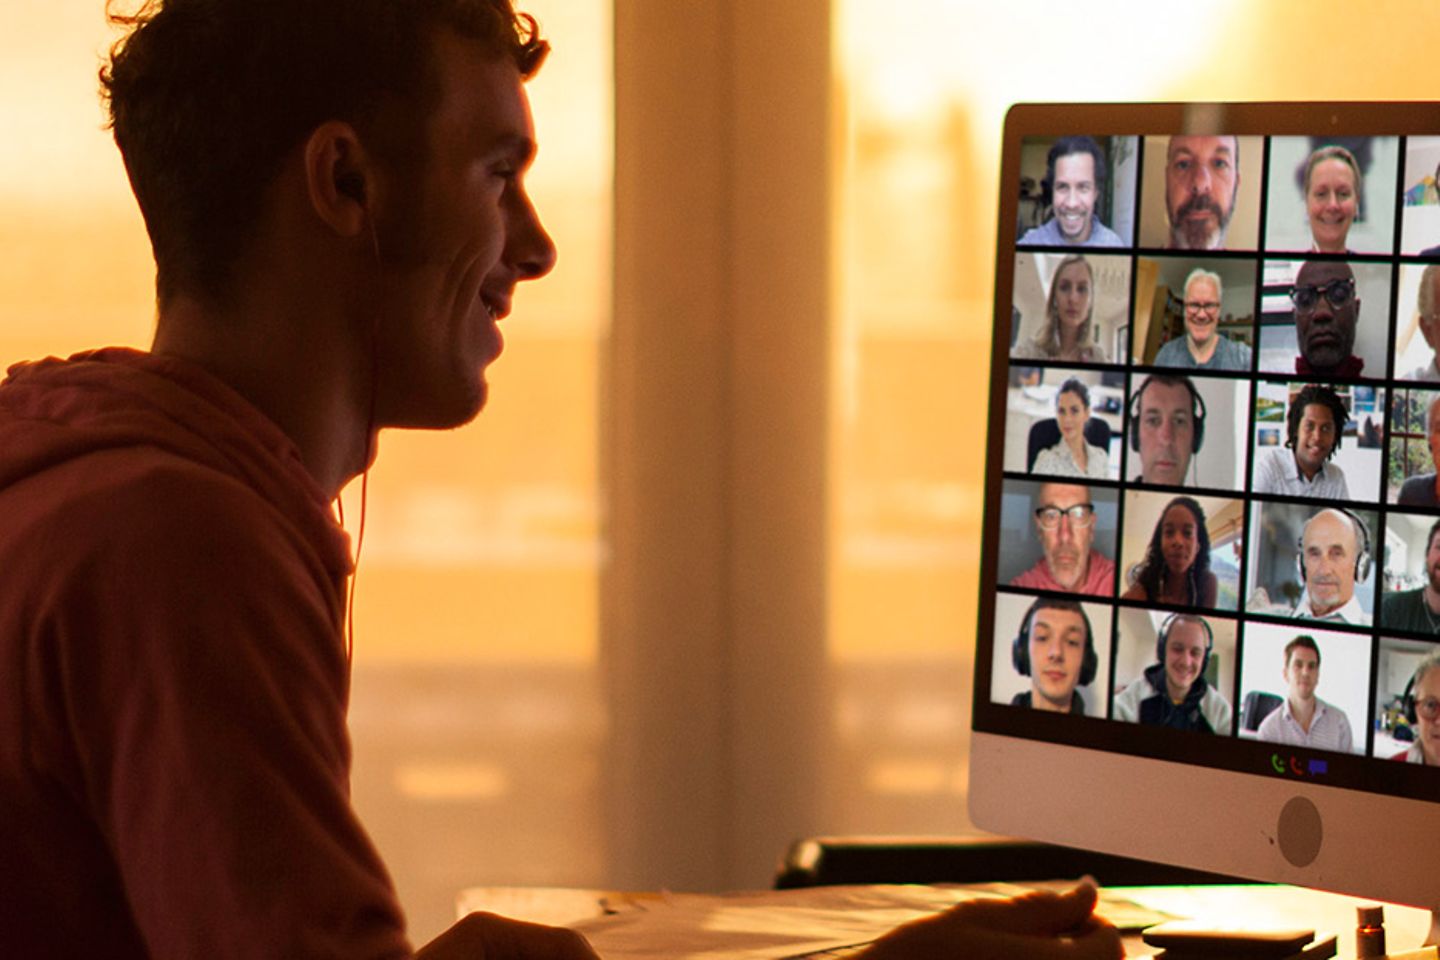 A man makes a group video call with many other people, behind him through the big windows you can see that the sun is setting